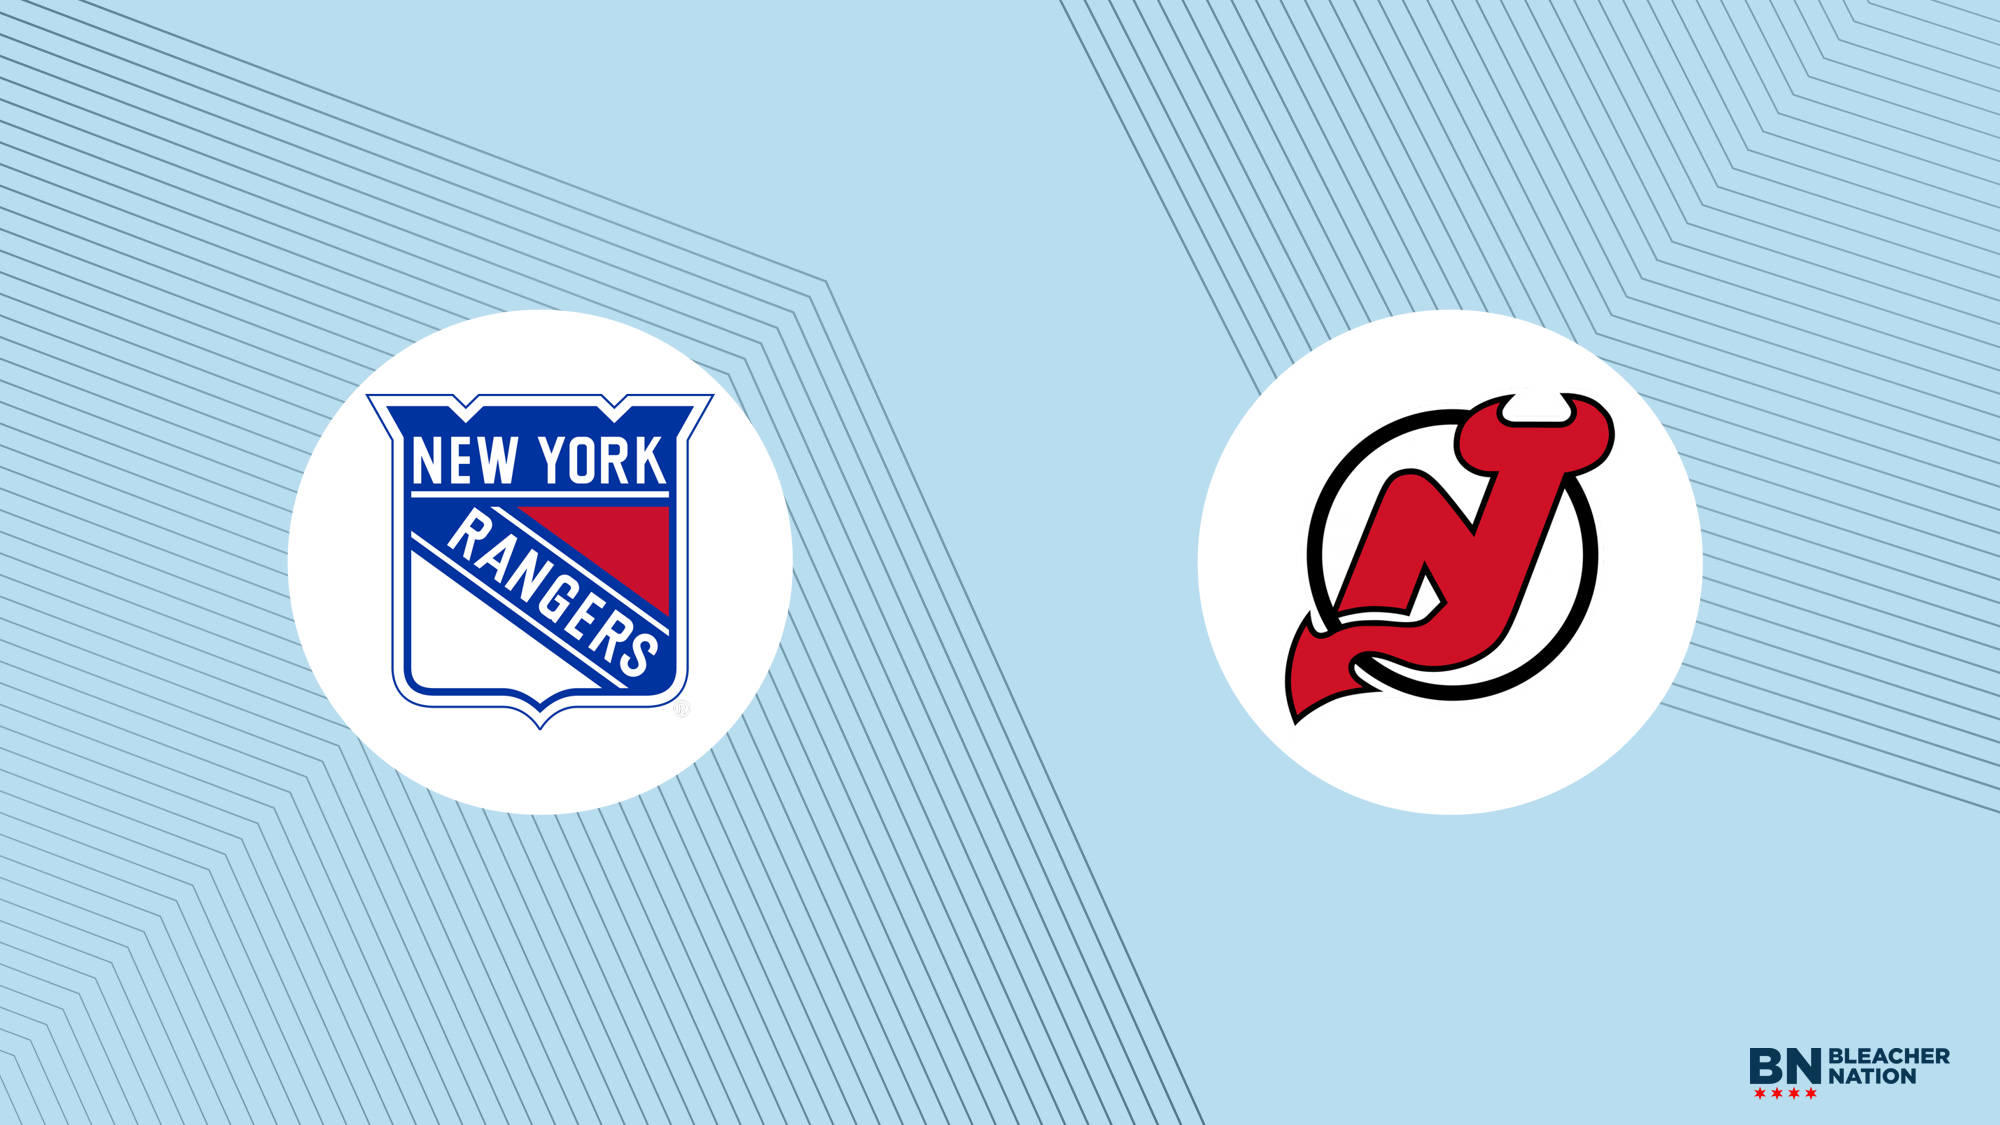 NHL playoffs: How to get tickets to see the New York Rangers play